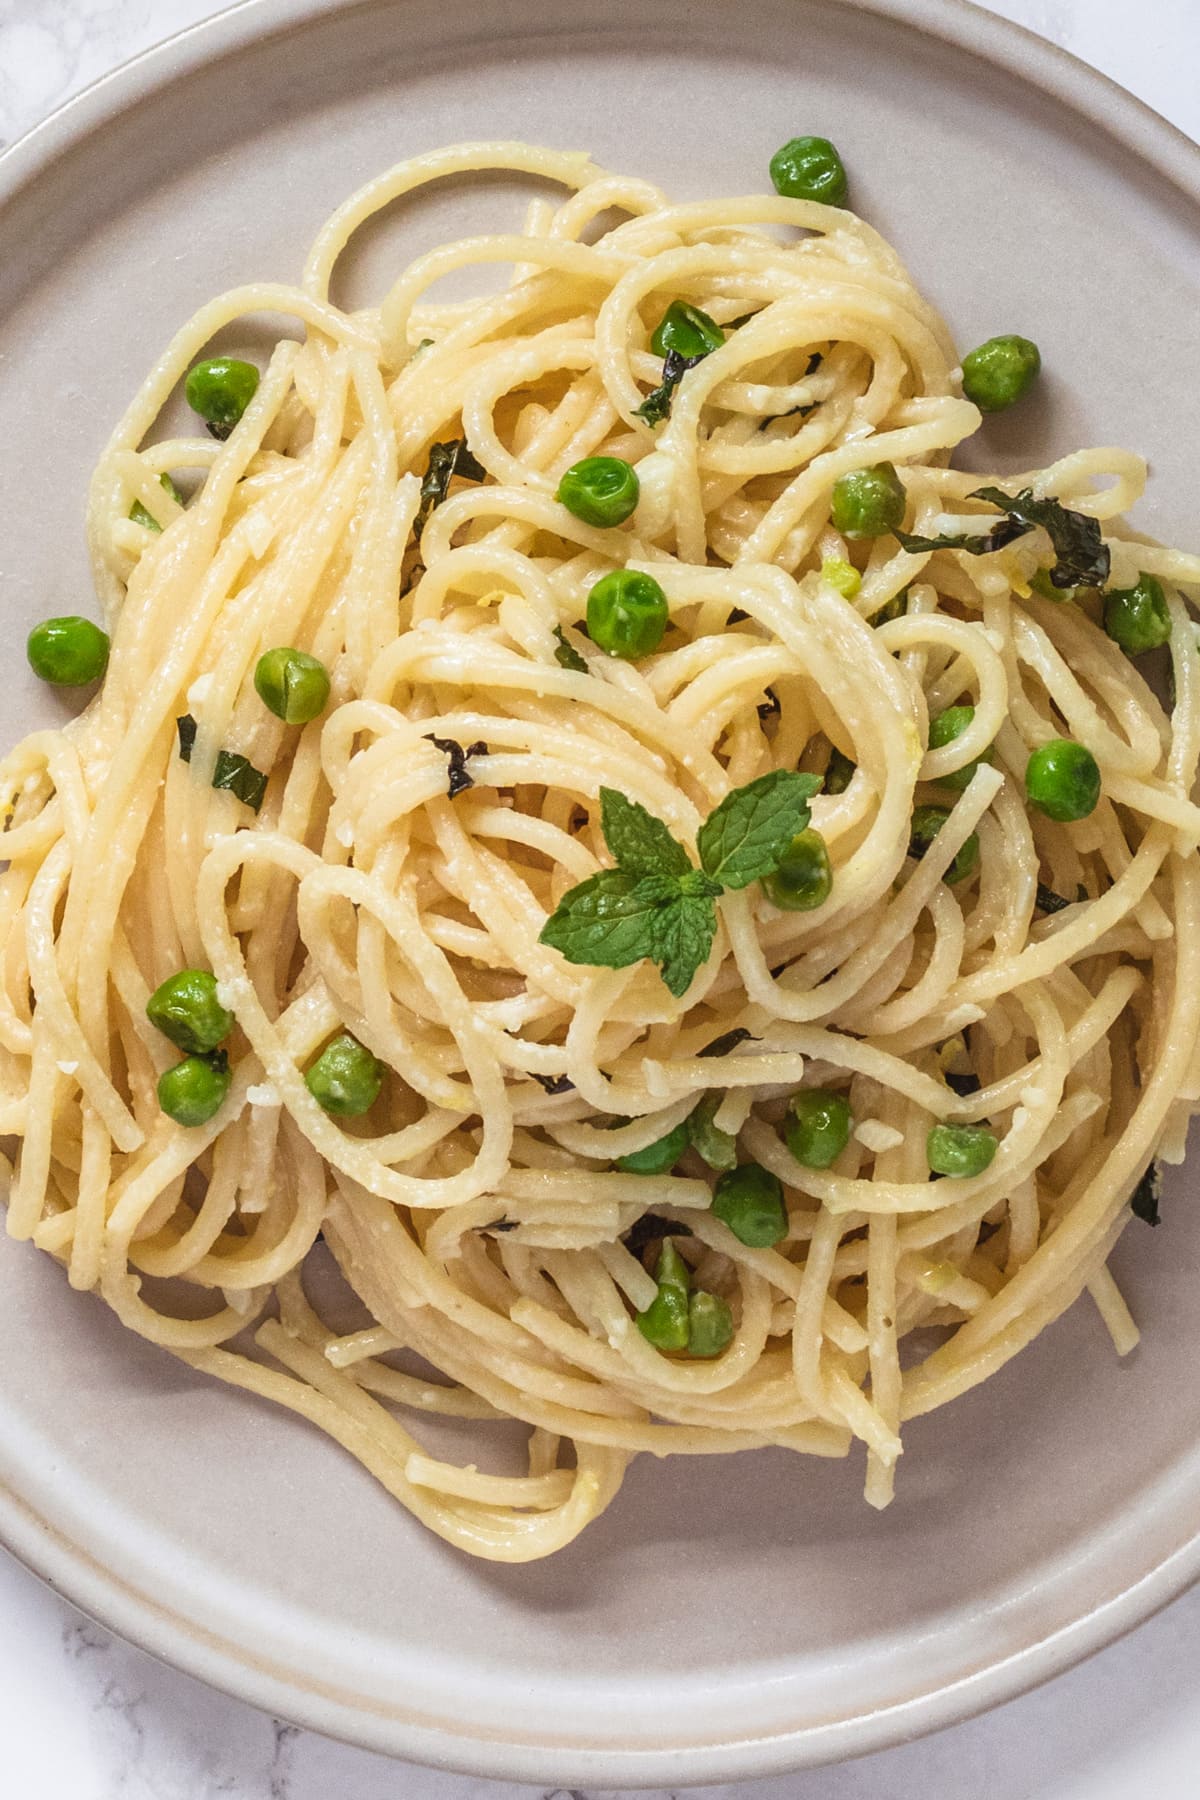 Top, close up view of peas, ricotta pasta in a plate